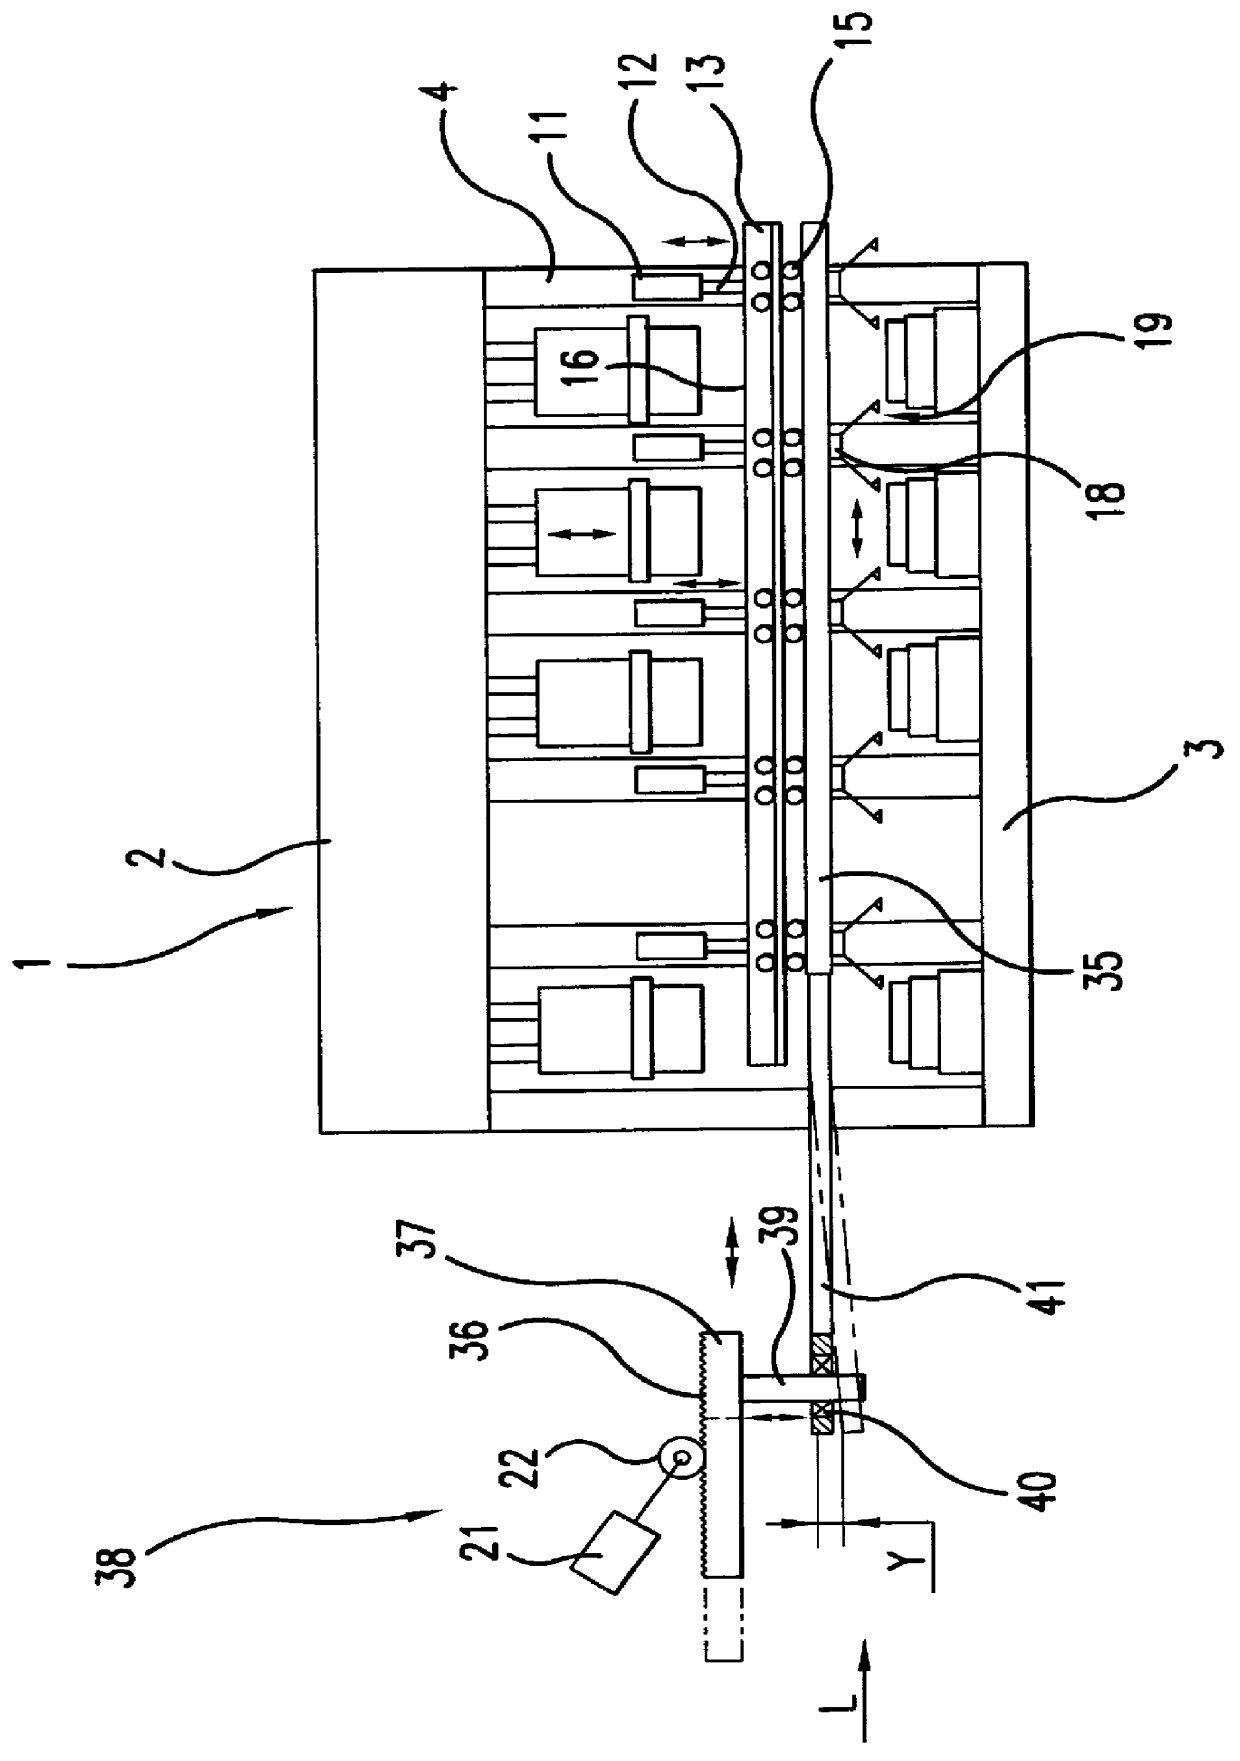 Apparatus and methods for transferring workpiece in a transfer press machine